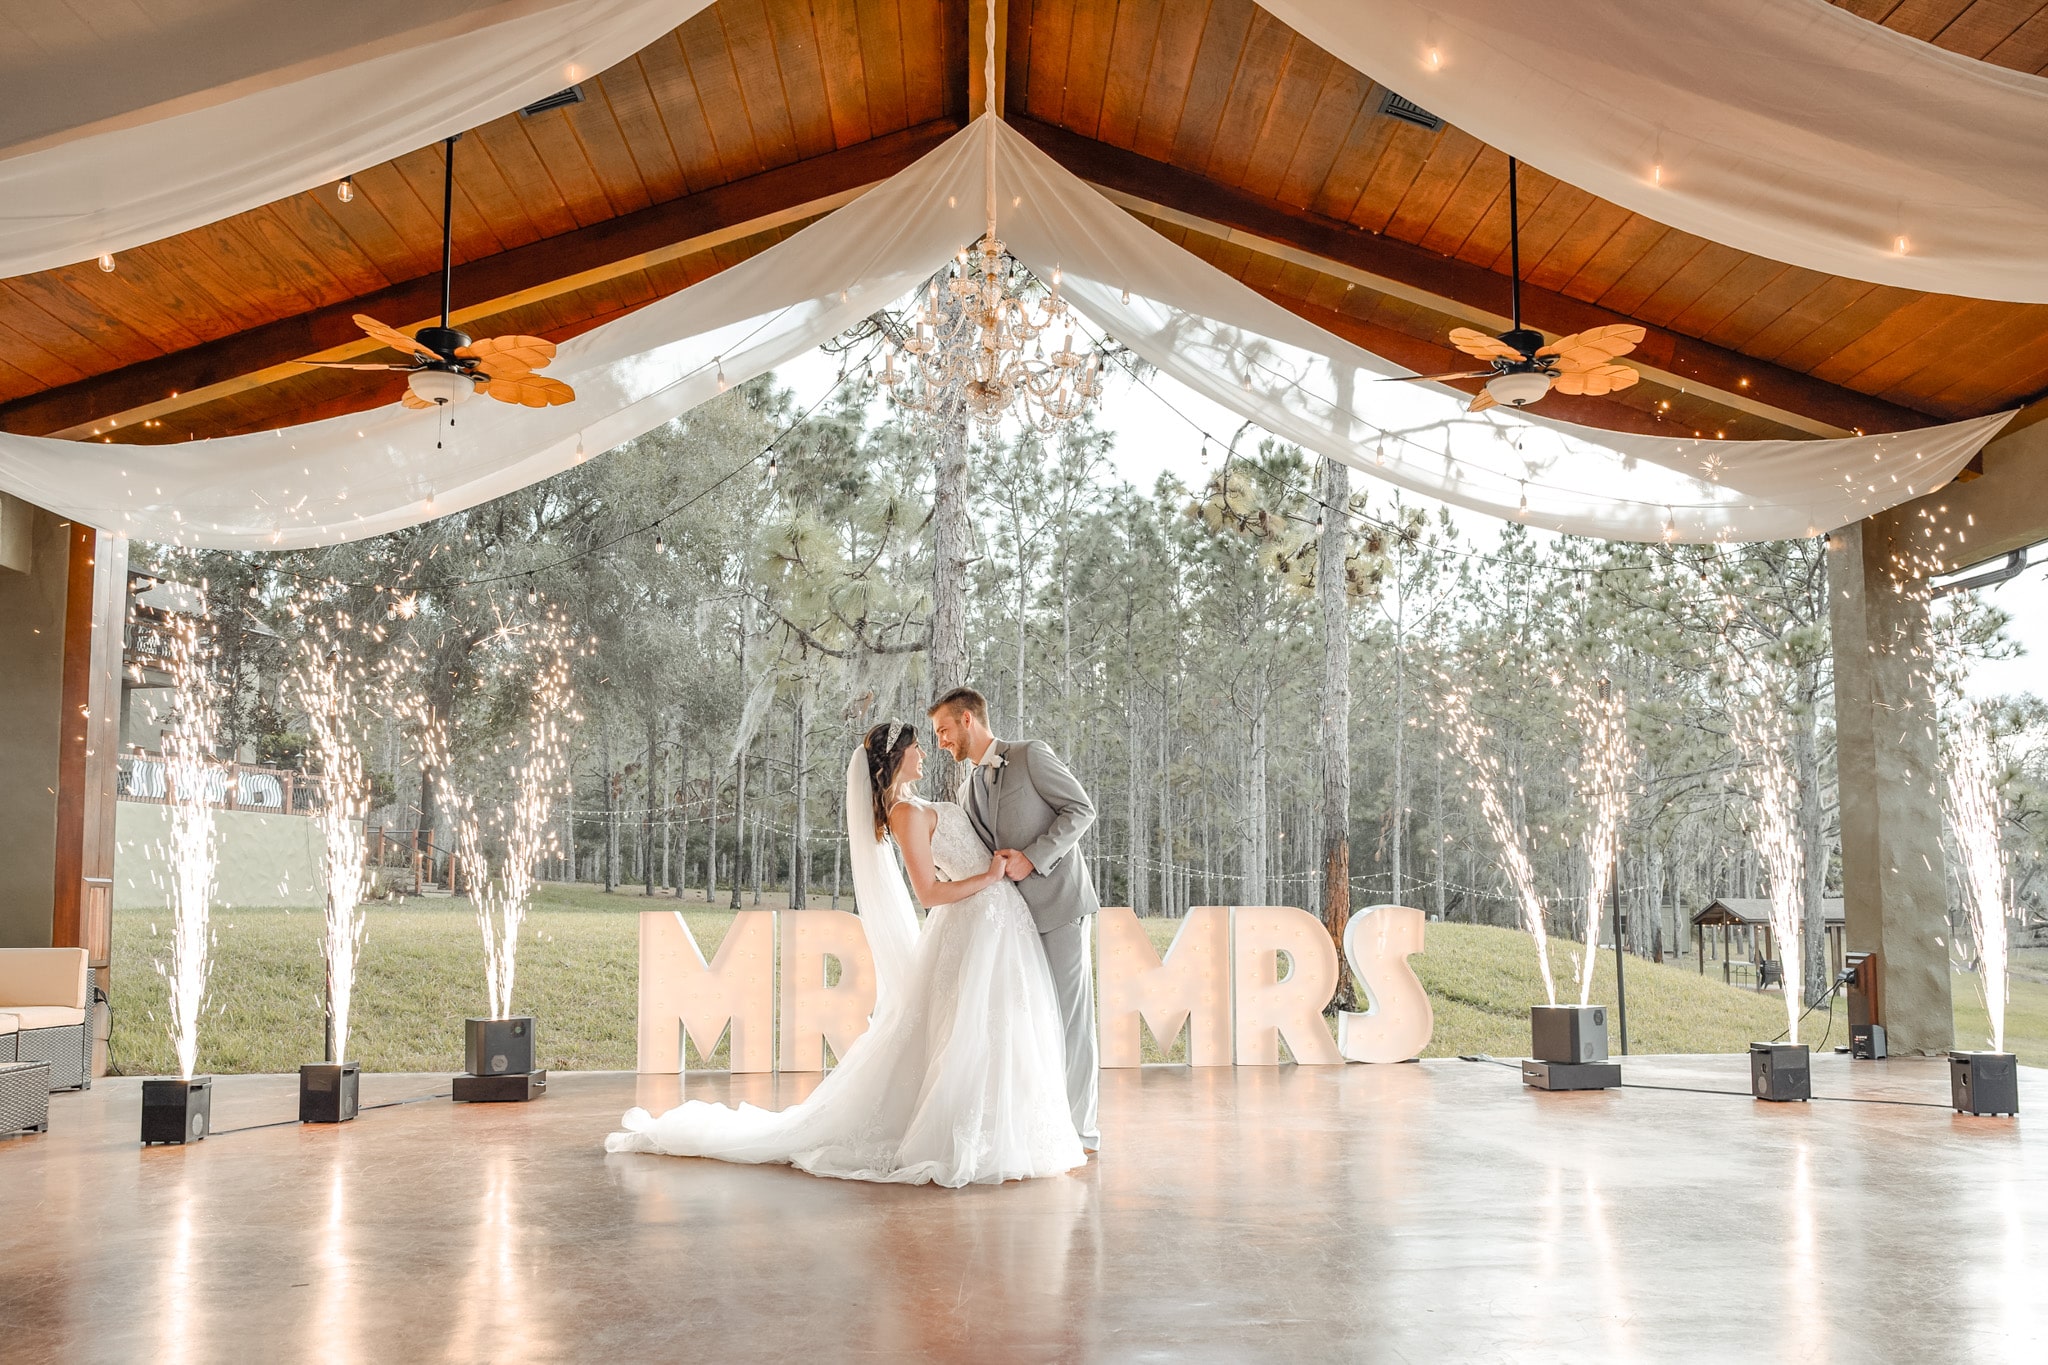 Bride and Groom dancing in an outdoor pavilion with marquee letters that read "MR & MRS"